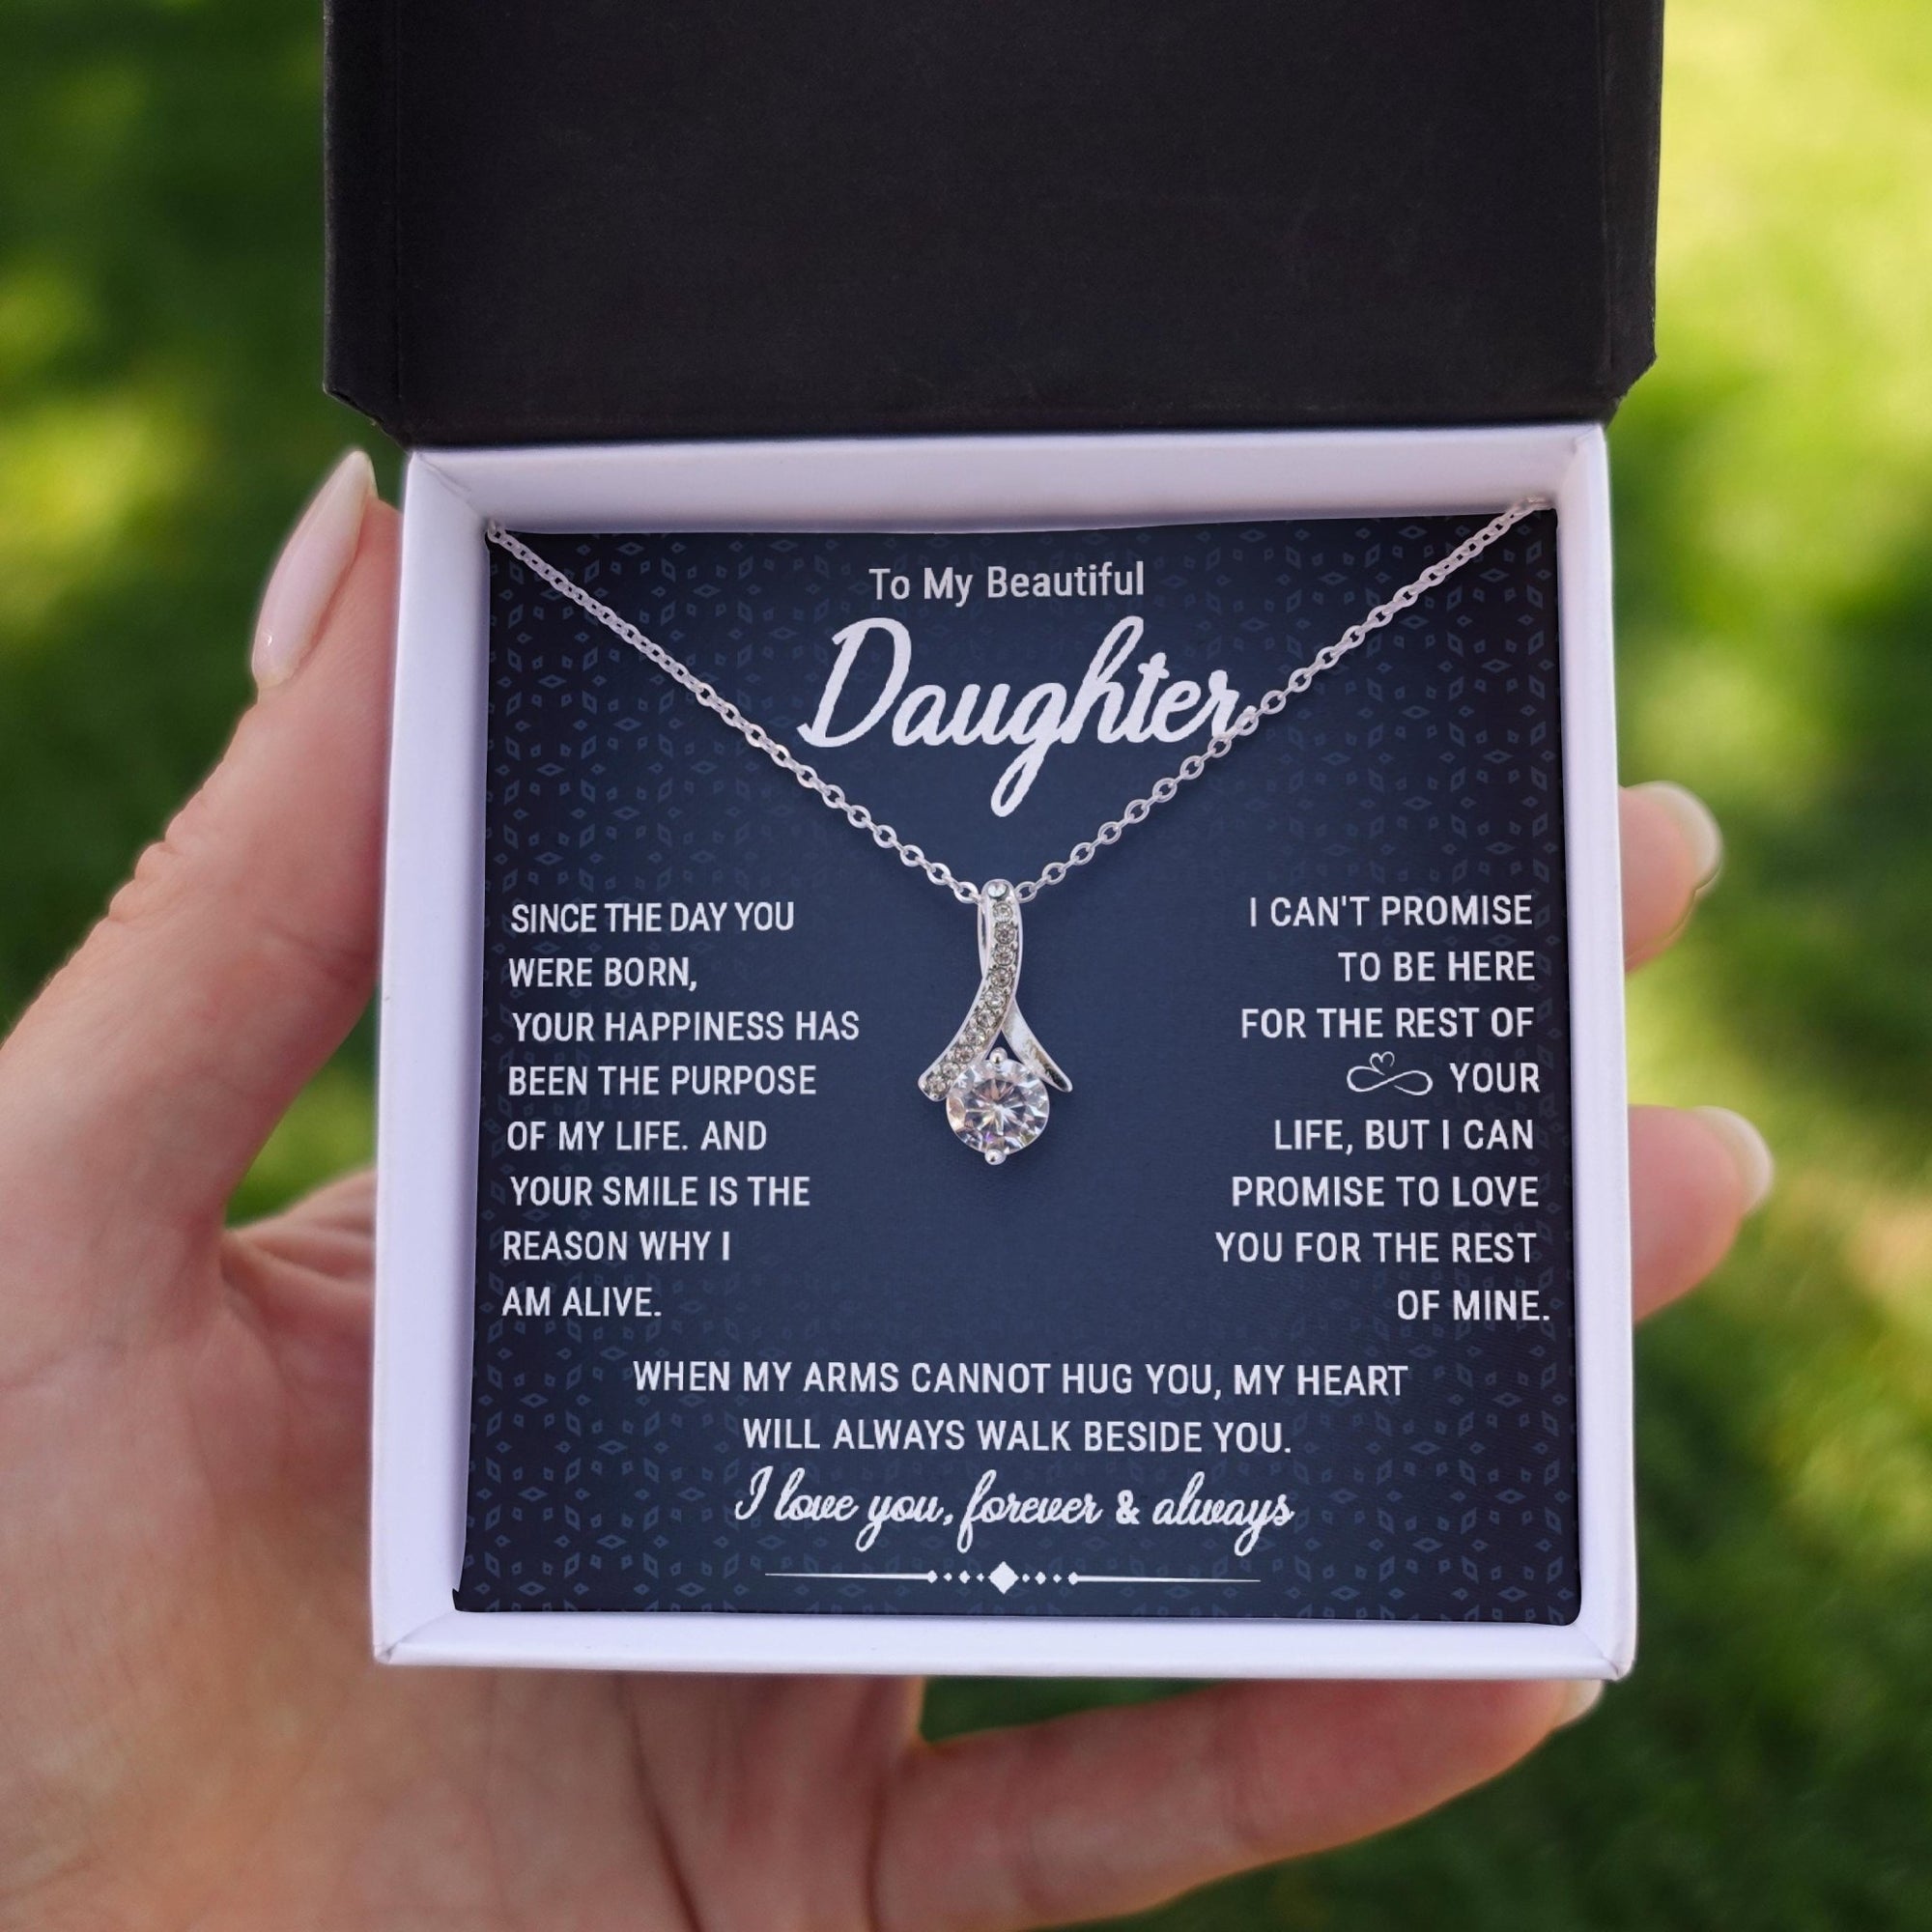 To My Beautiful Daughter - Walk Beside You - Sparkling Radiance Necklace - Celeste Jewel